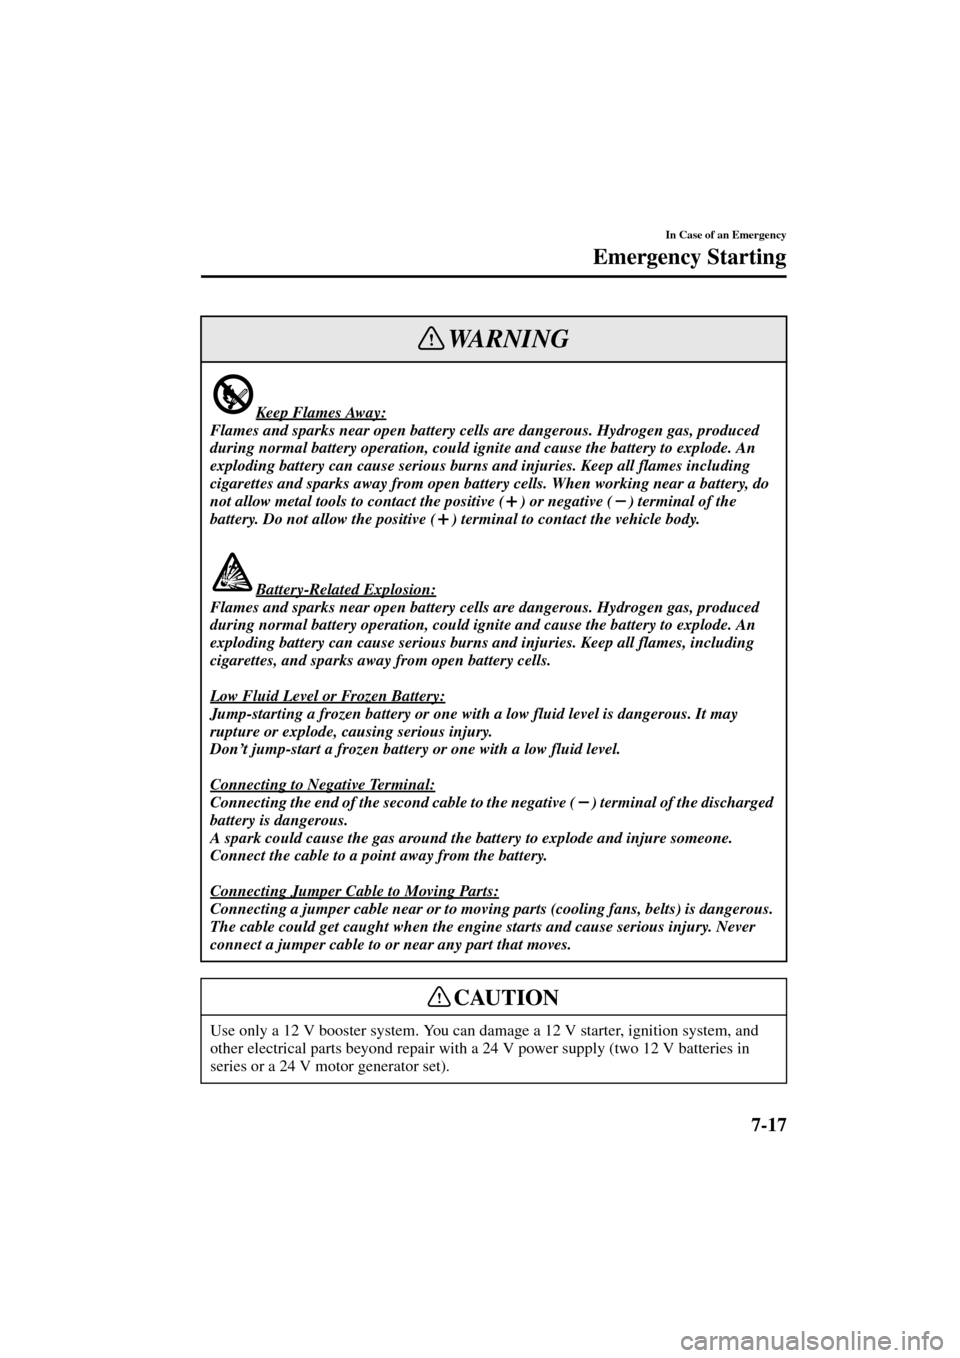 MAZDA MODEL 3 HATCHBACK 2004  Owners Manual (in English) 7-17
In Case of an Emergency
Emergency Starting
Form No. 8S18-EA-03I
Keep Flames Away:
Flames and sparks near open battery cells are dangerous. Hydrogen gas, produced 
during normal battery operation,